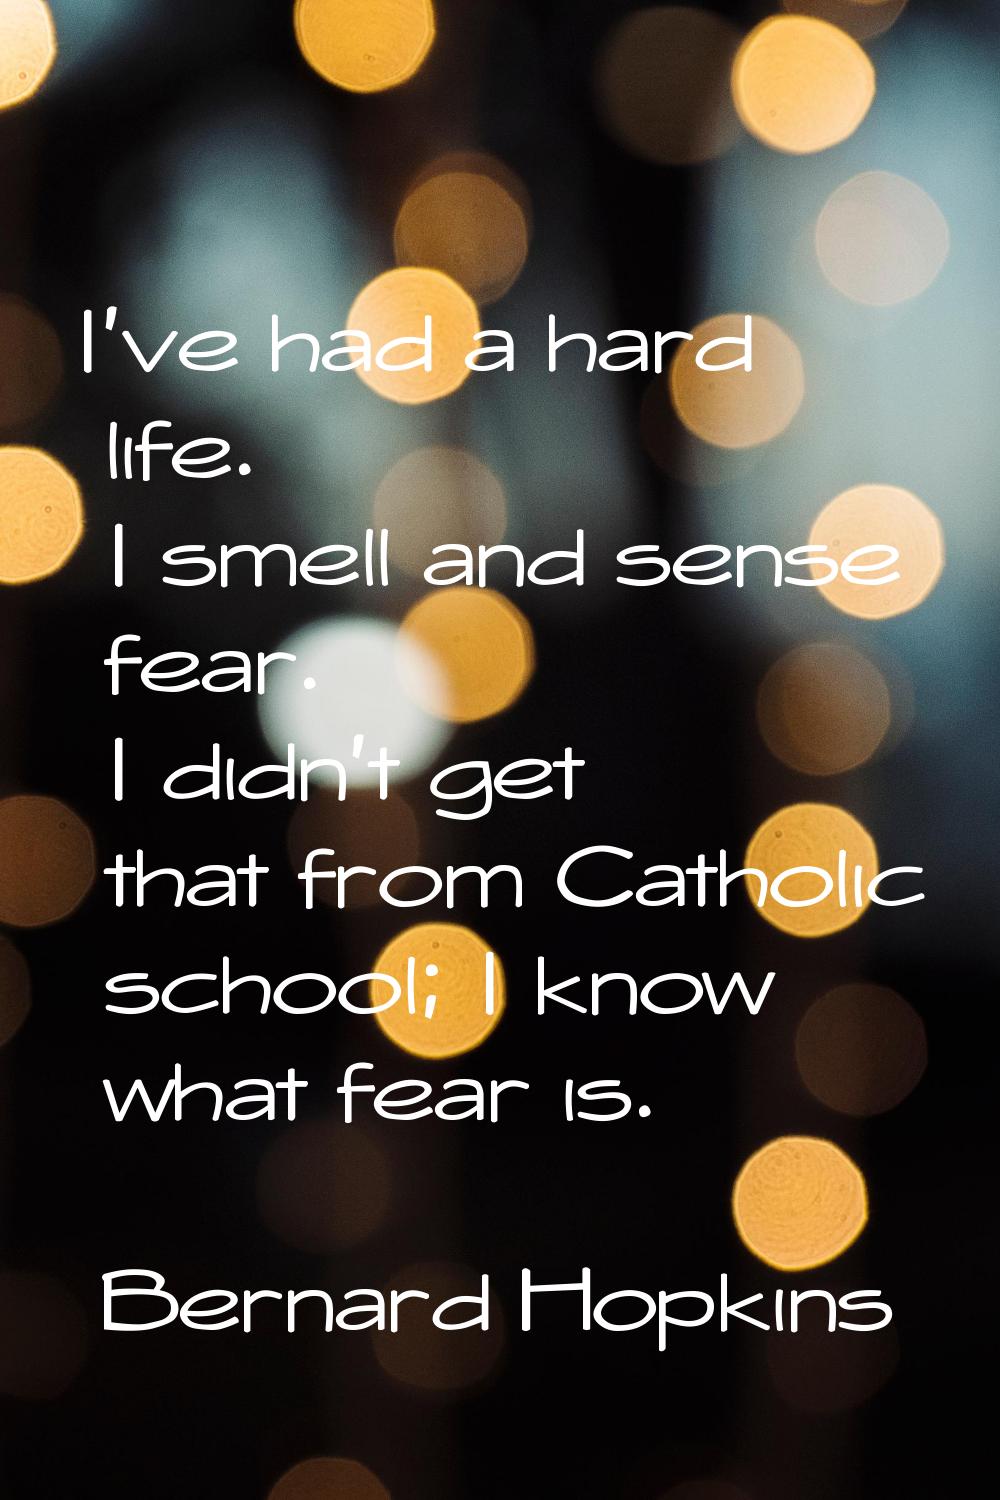 I've had a hard life. I smell and sense fear. I didn't get that from Catholic school; I know what f